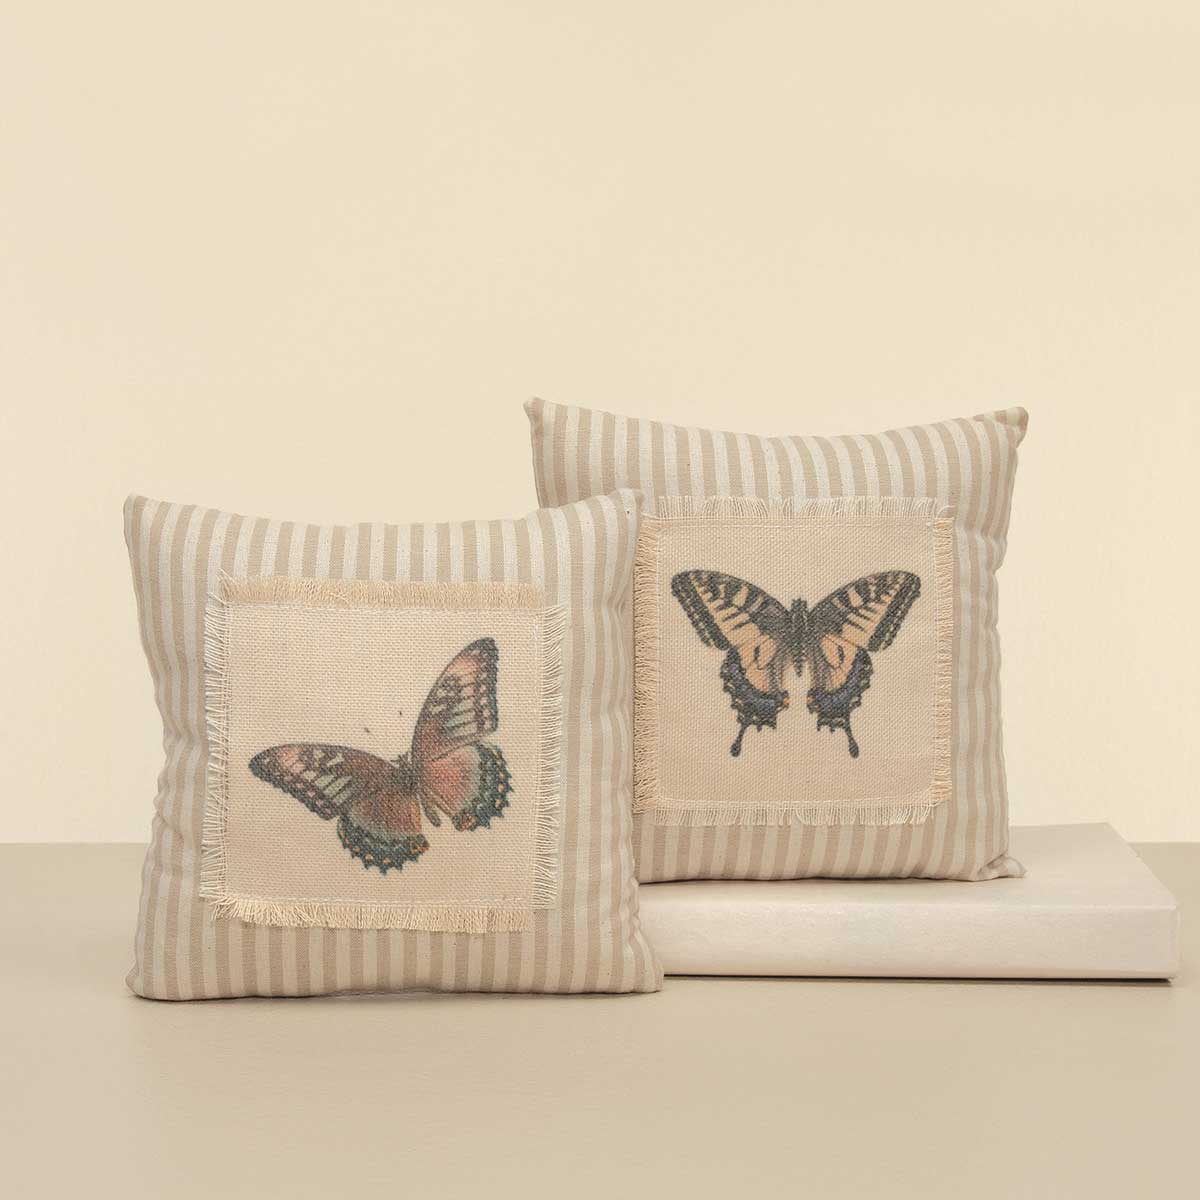 PILLOW BUTTERFLY 2 ASSORTED SMALL 6IN X 6IN BEIGE/CREAM PLUSH